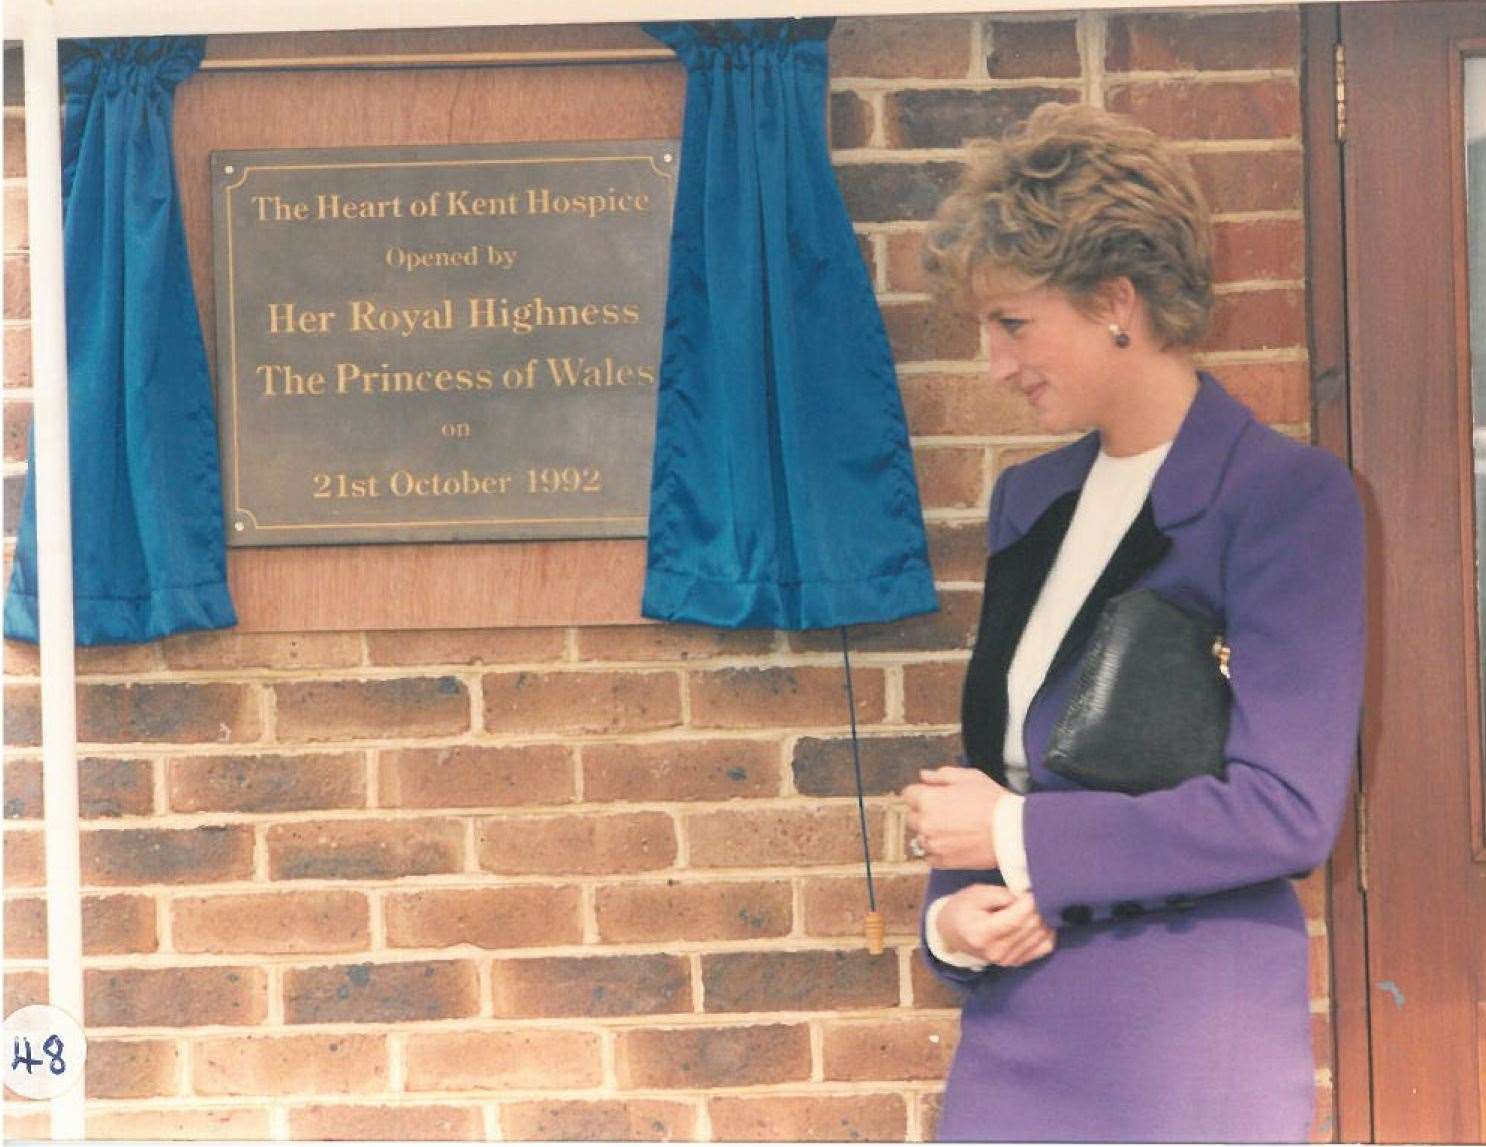 Princess Diana officially opened the current hospice building in 1992